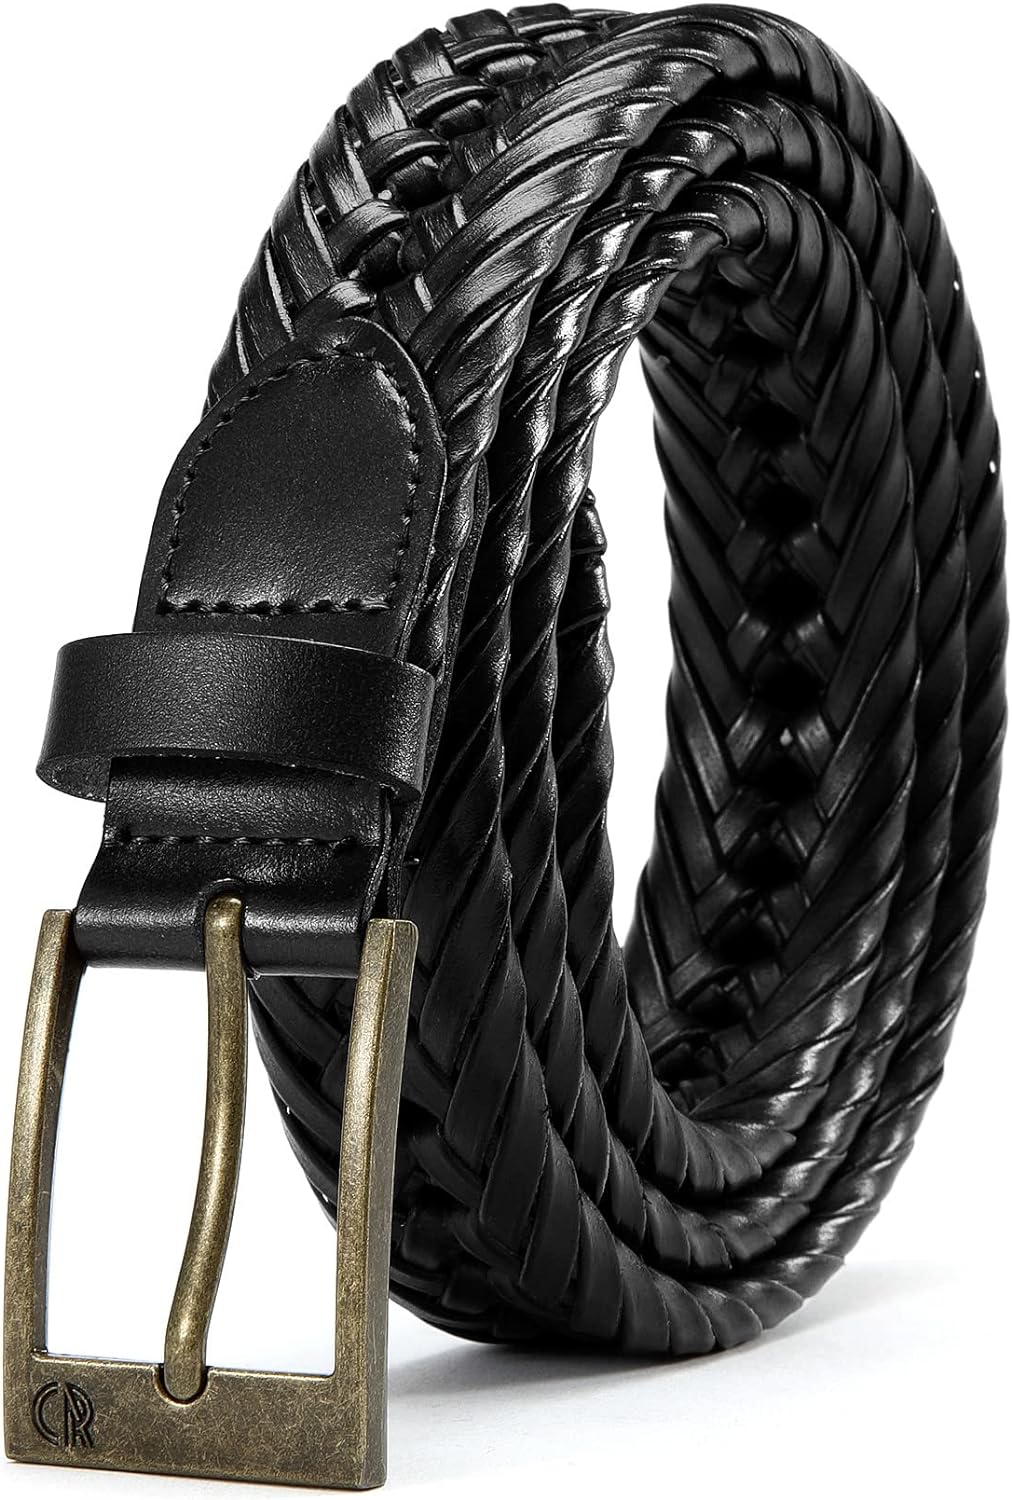 CHAOREN Braided Belt for Men - 1 1/8" Leather Belt for Casual Jeans - Ultimate Comfort & Style